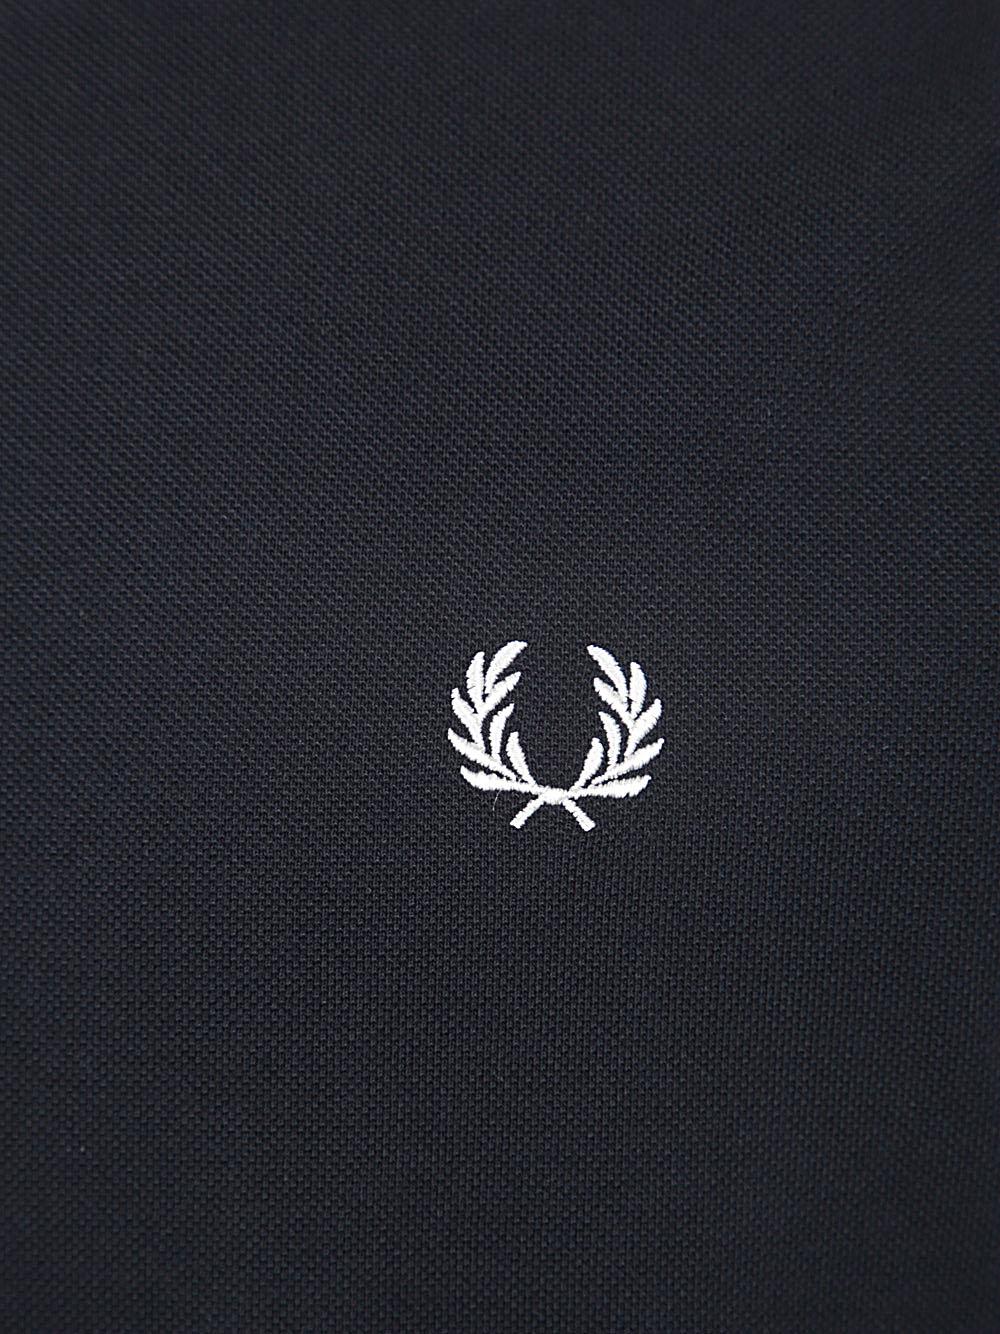 Fp Plain Fred Perry Shirt